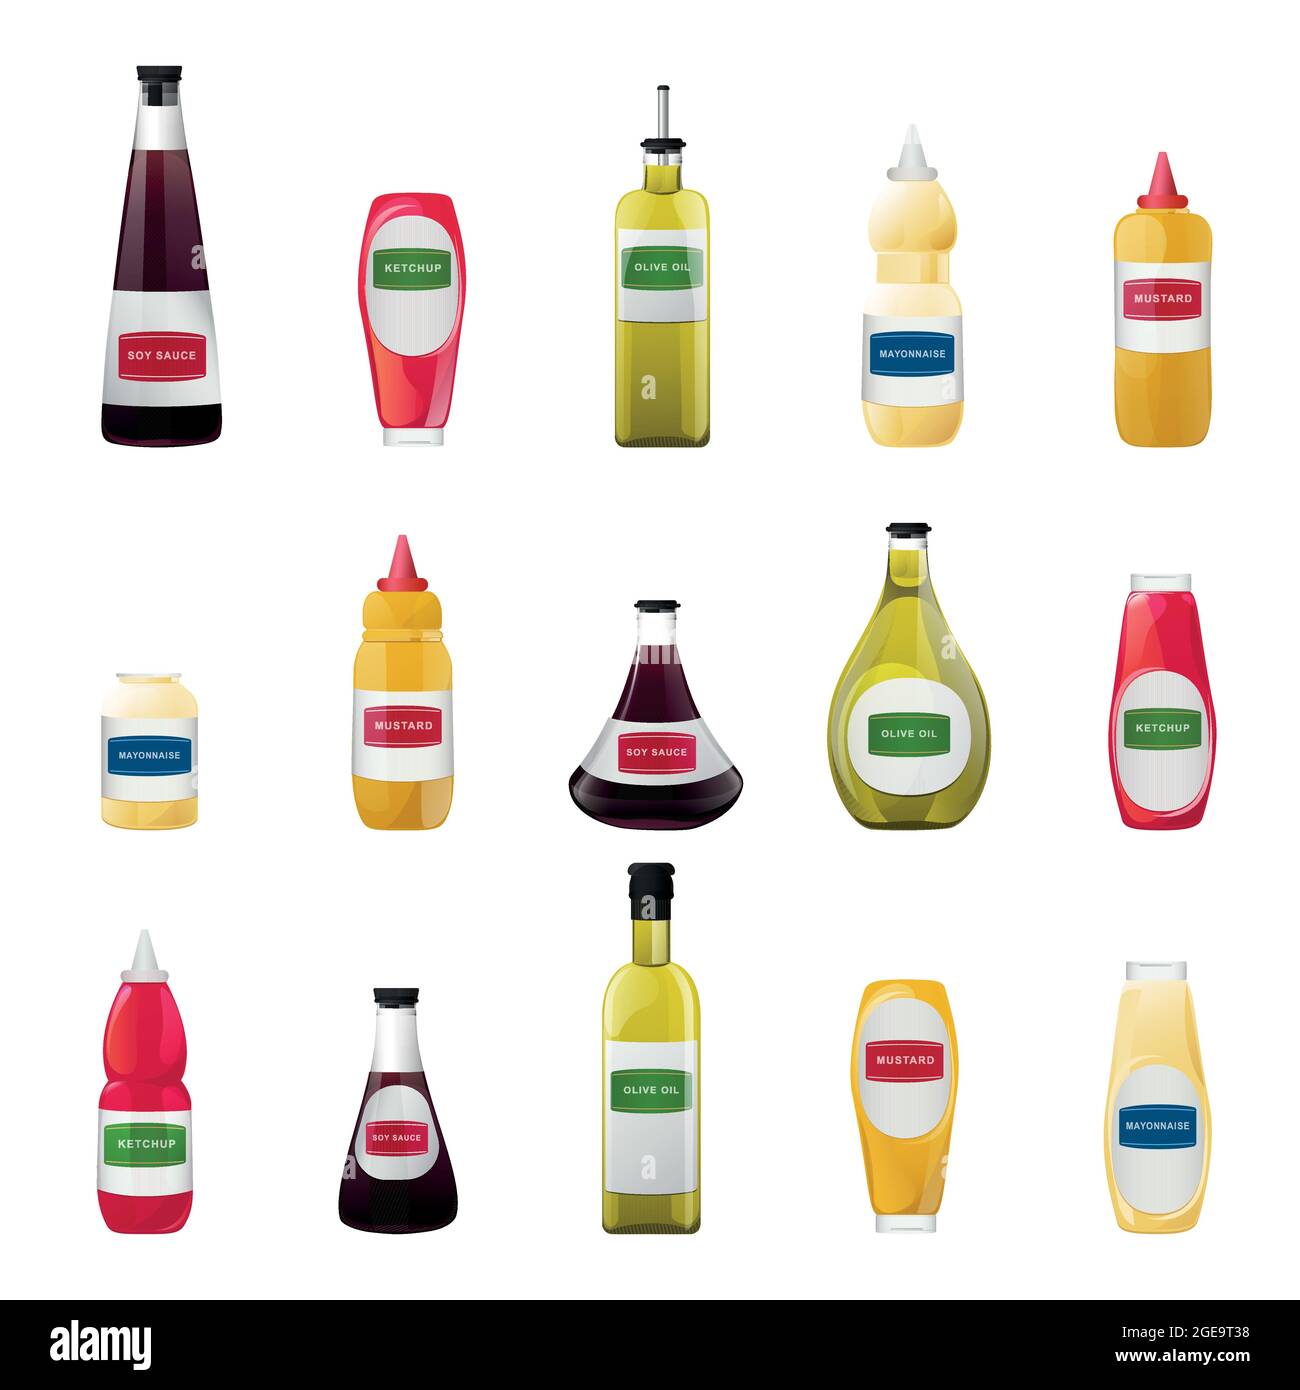 Big sauce in bottles set. Soy, Olive Oil, Mustard, Ketchup and Mayonnaise sauces. Condiment elements for food design. Stock Vector